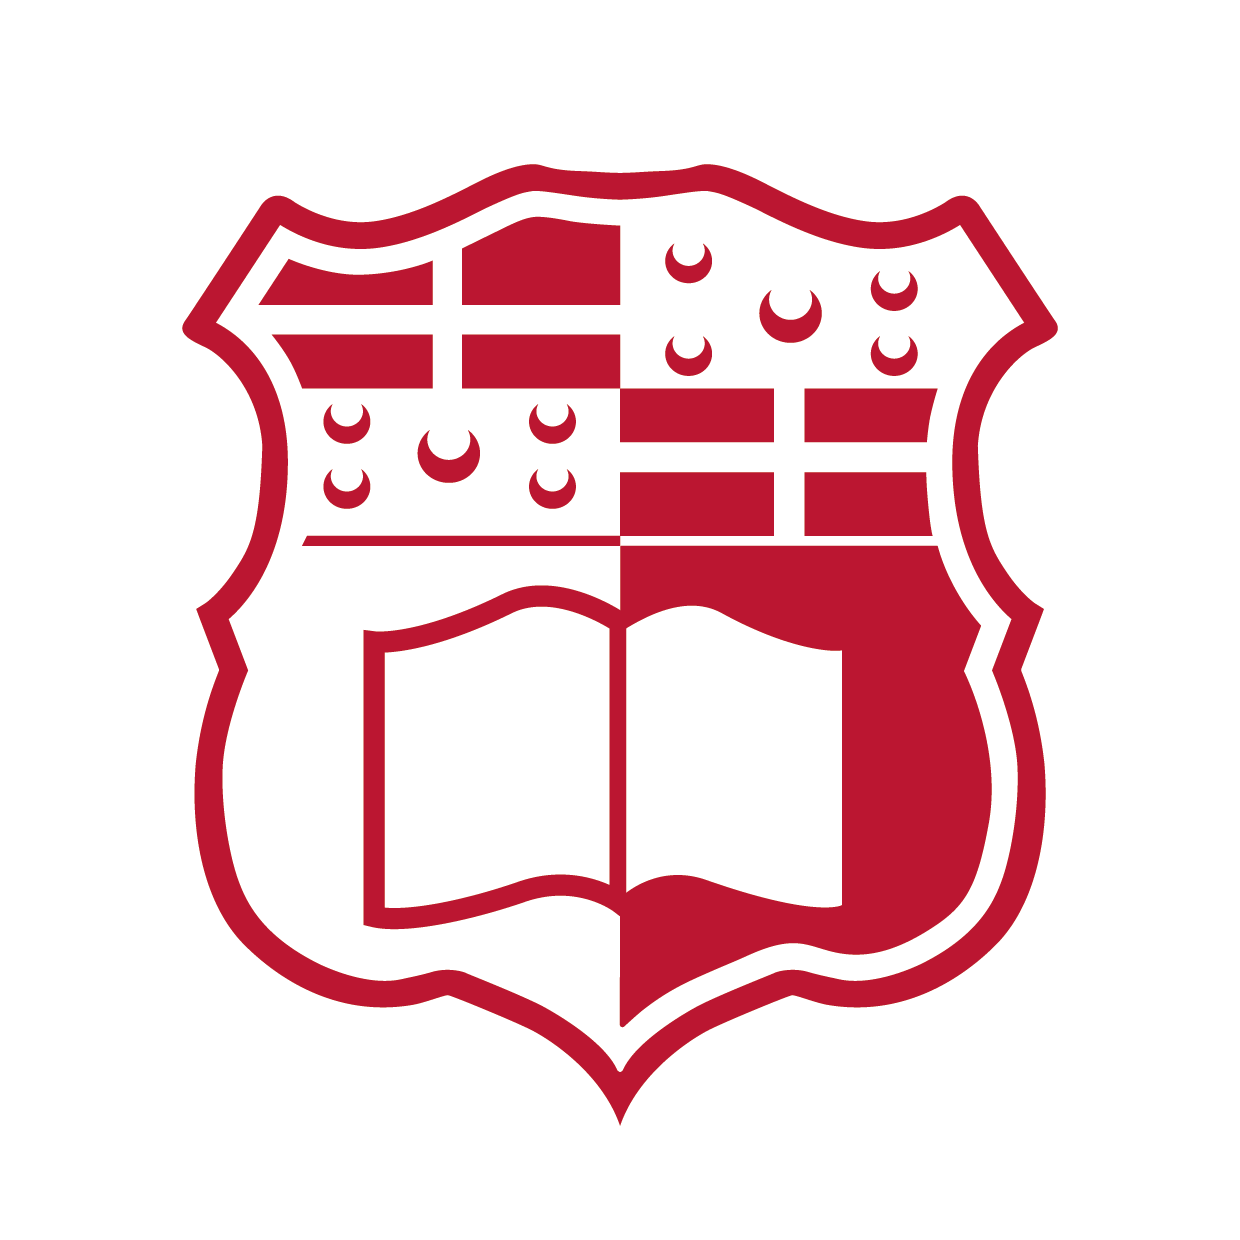 Malta Logo - What do you think about the new University of Malta logo?